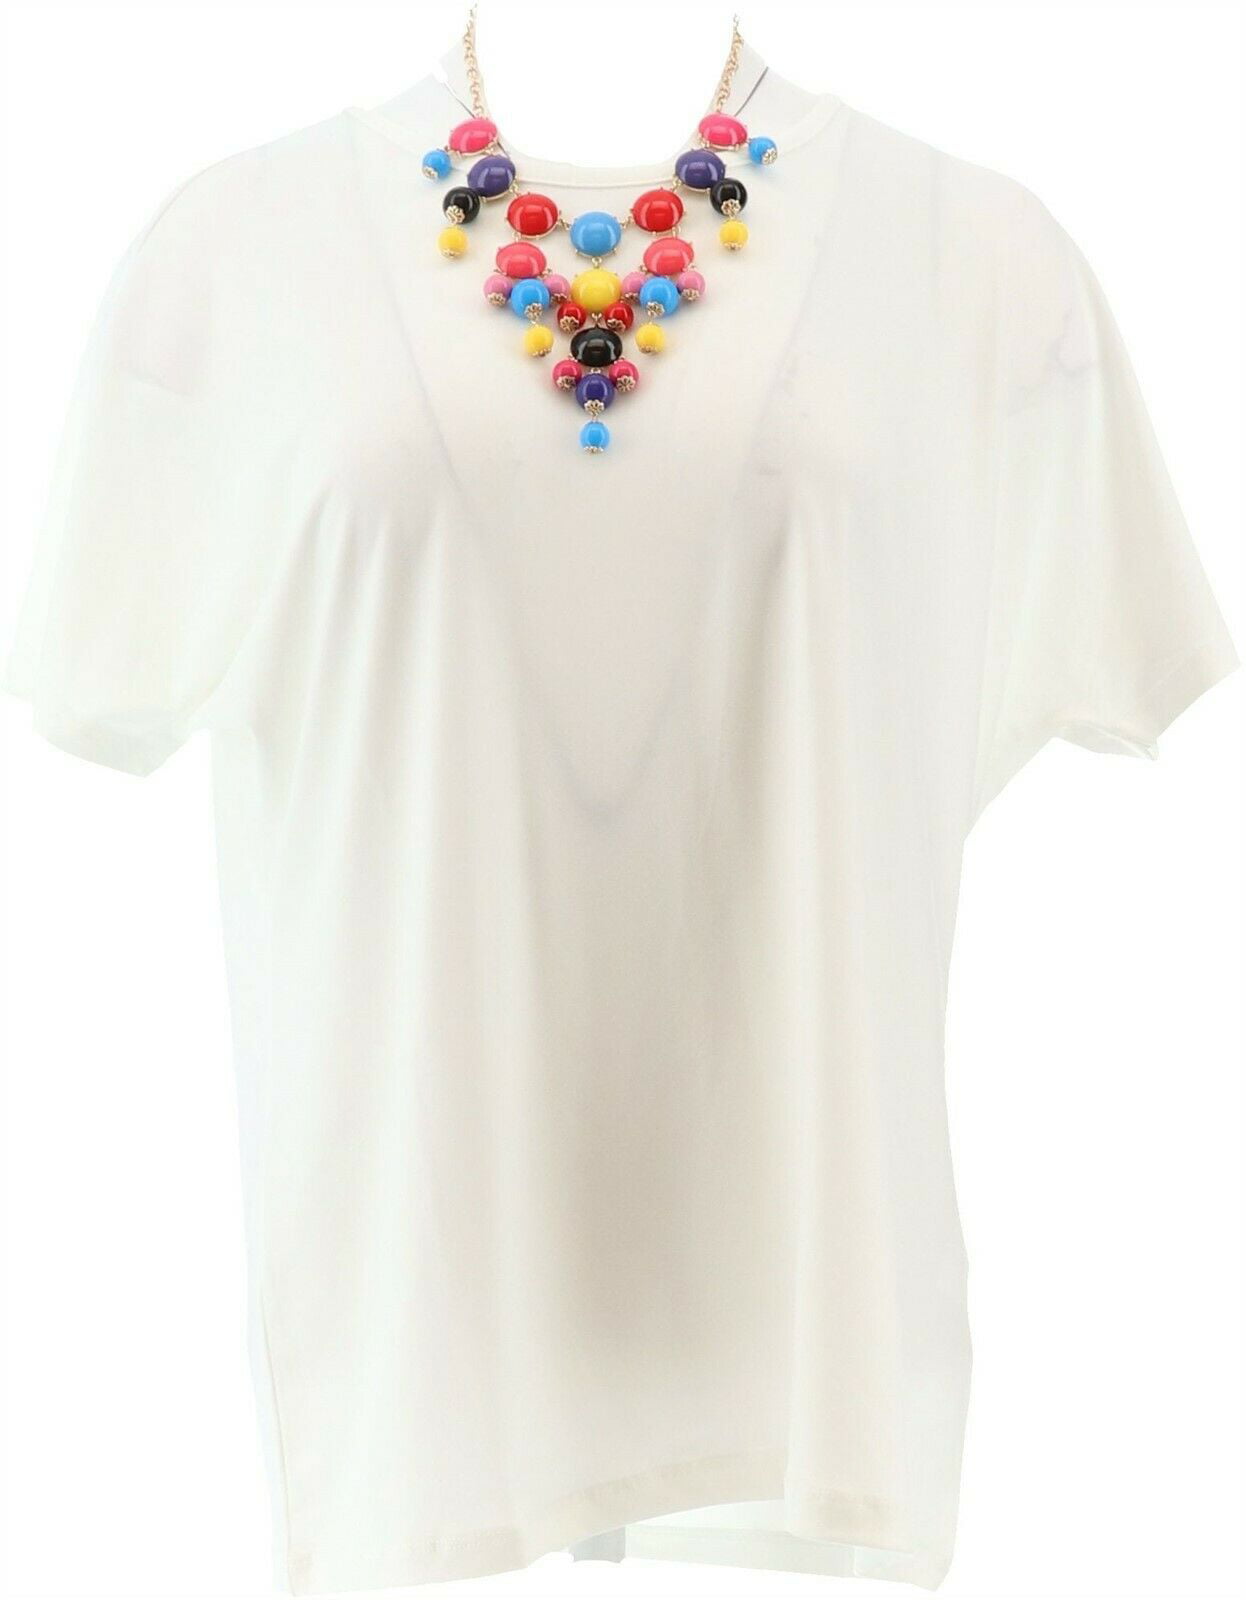 IMAN City Chic 2Pc Tee Necklace BLACK WHITE S NEW 690-332